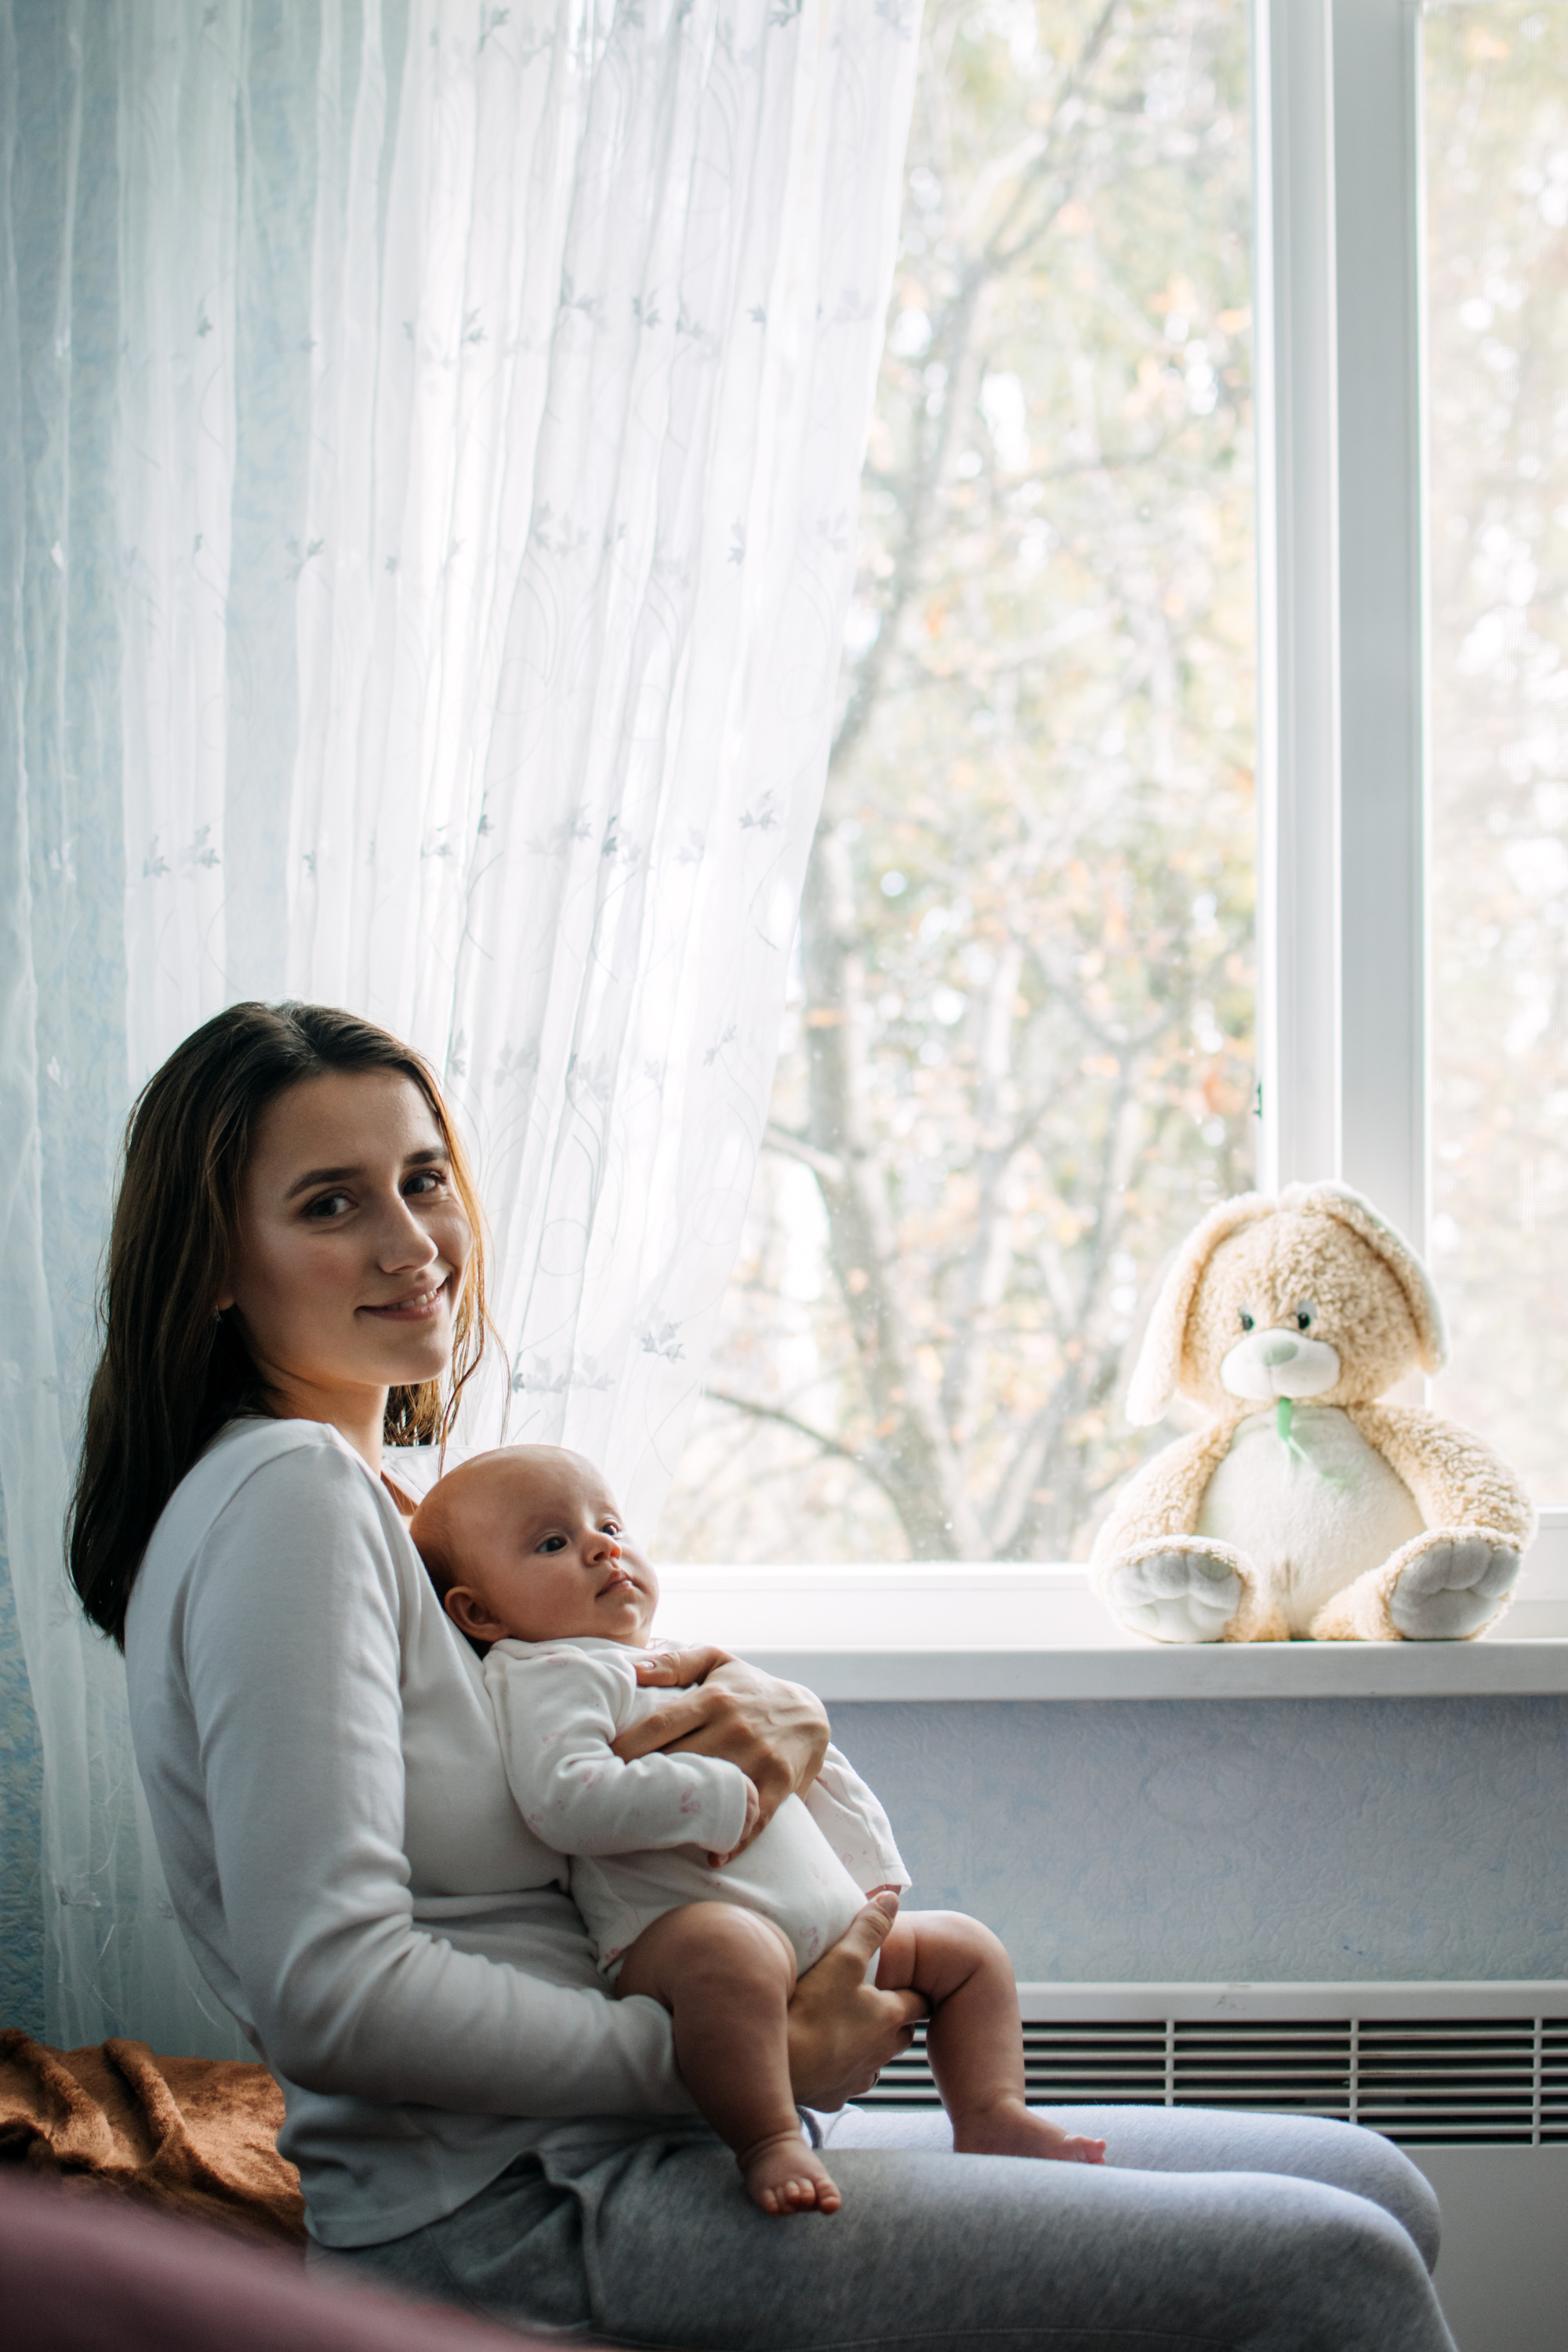 Mental Health in Postpartum Time. Maternal Mental Health. How to Avoid Pregnancy and Postpartum Disorders, Postpartum Baby Blues, Depression. Portrait of Happy Mother and Newborn Baby